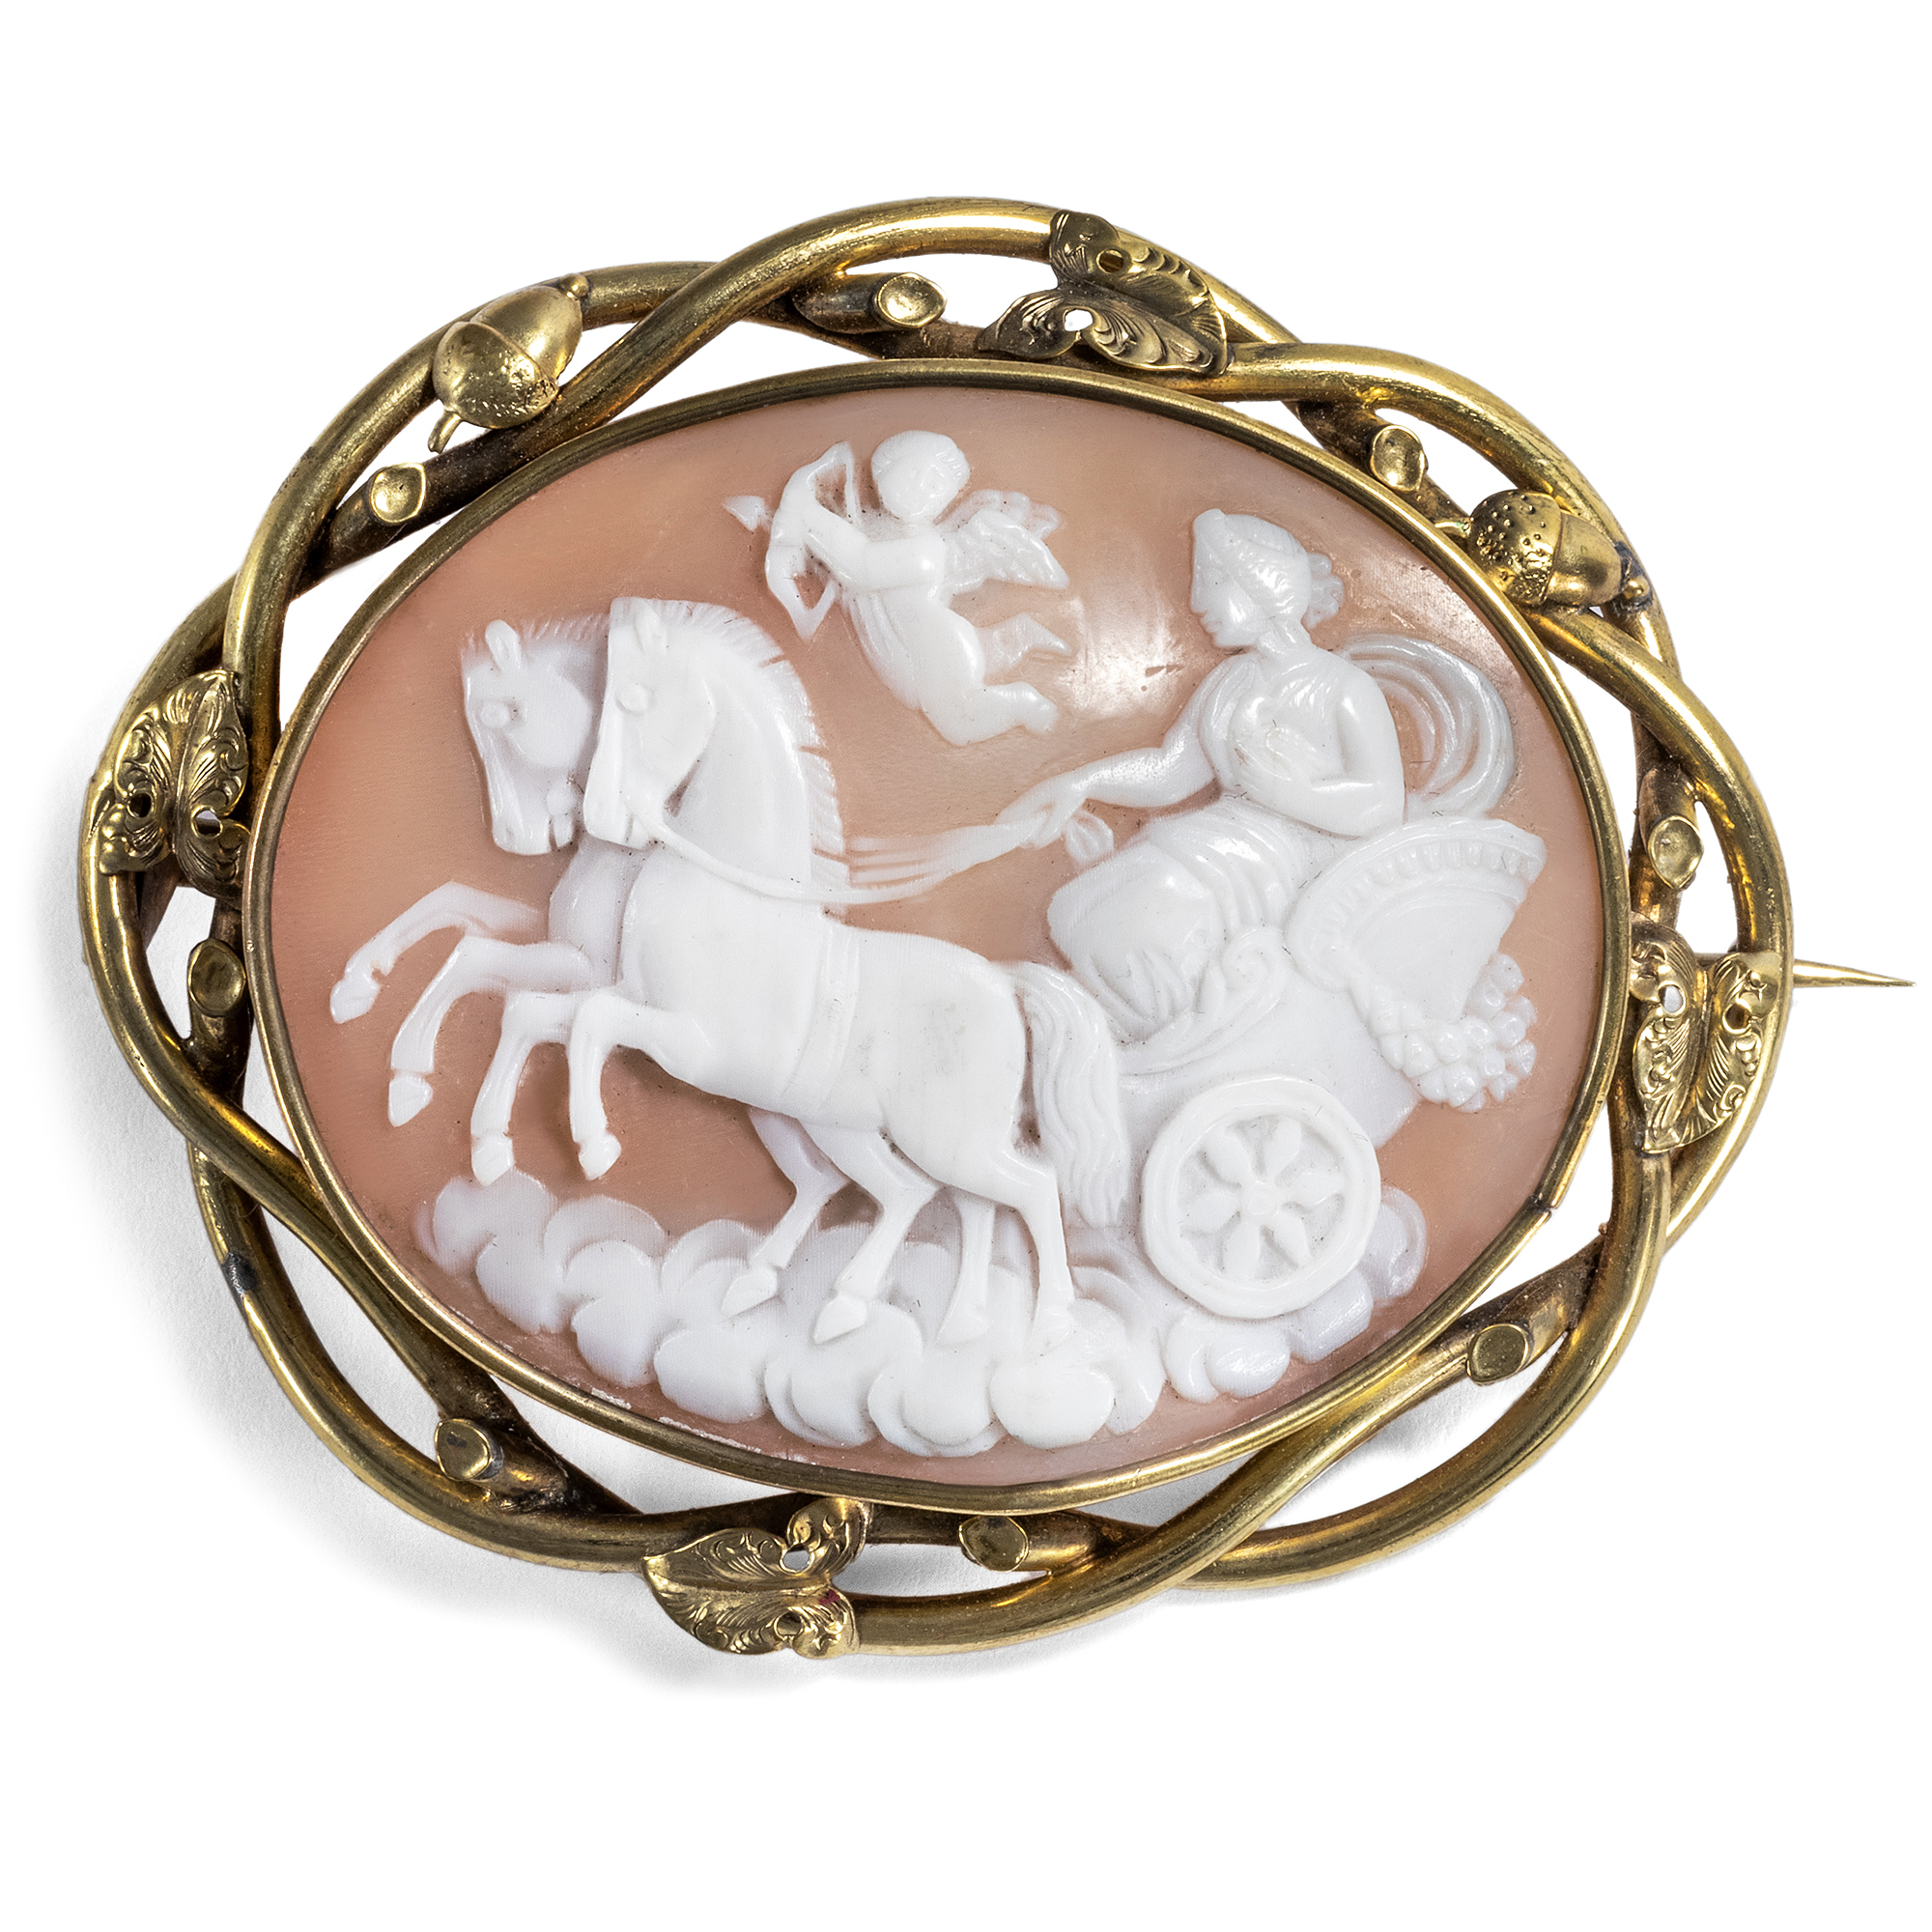 Antique Cameo of Venus and Cupid, Italy & England c. 1850